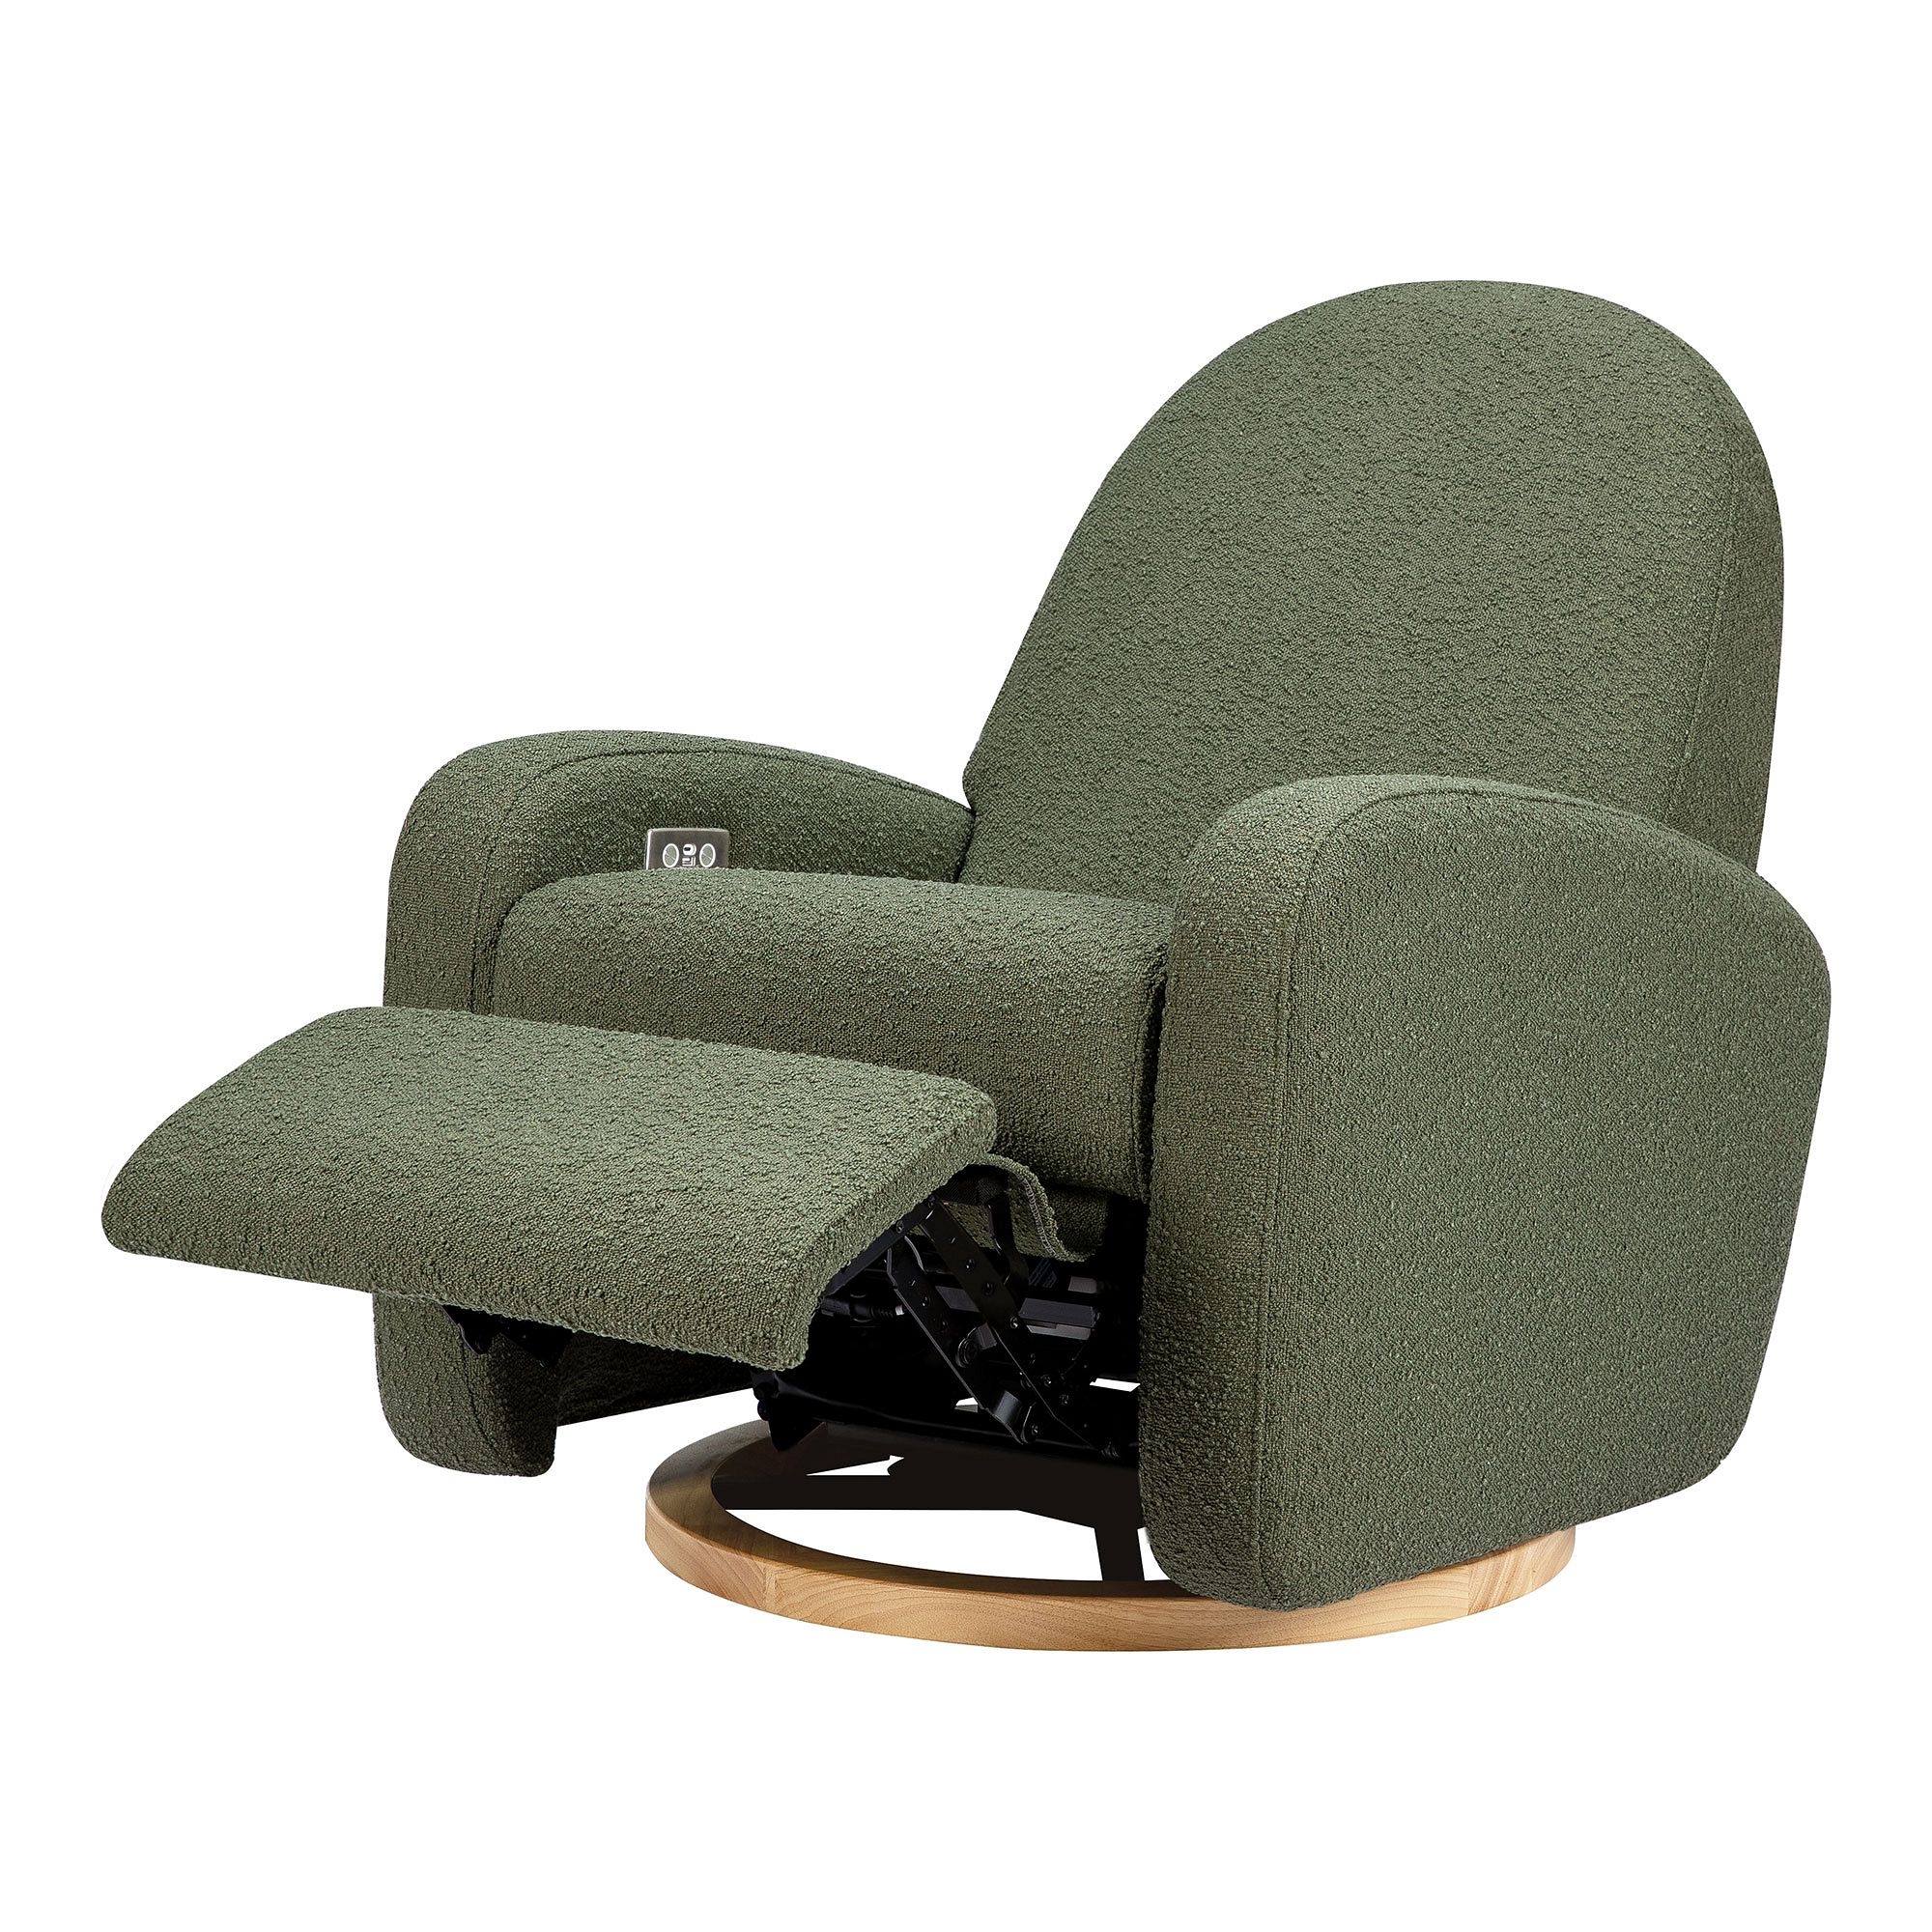 Nami Electronic Recliner And Swivel Glider Recliner With Usb Port, Olive - Image 5